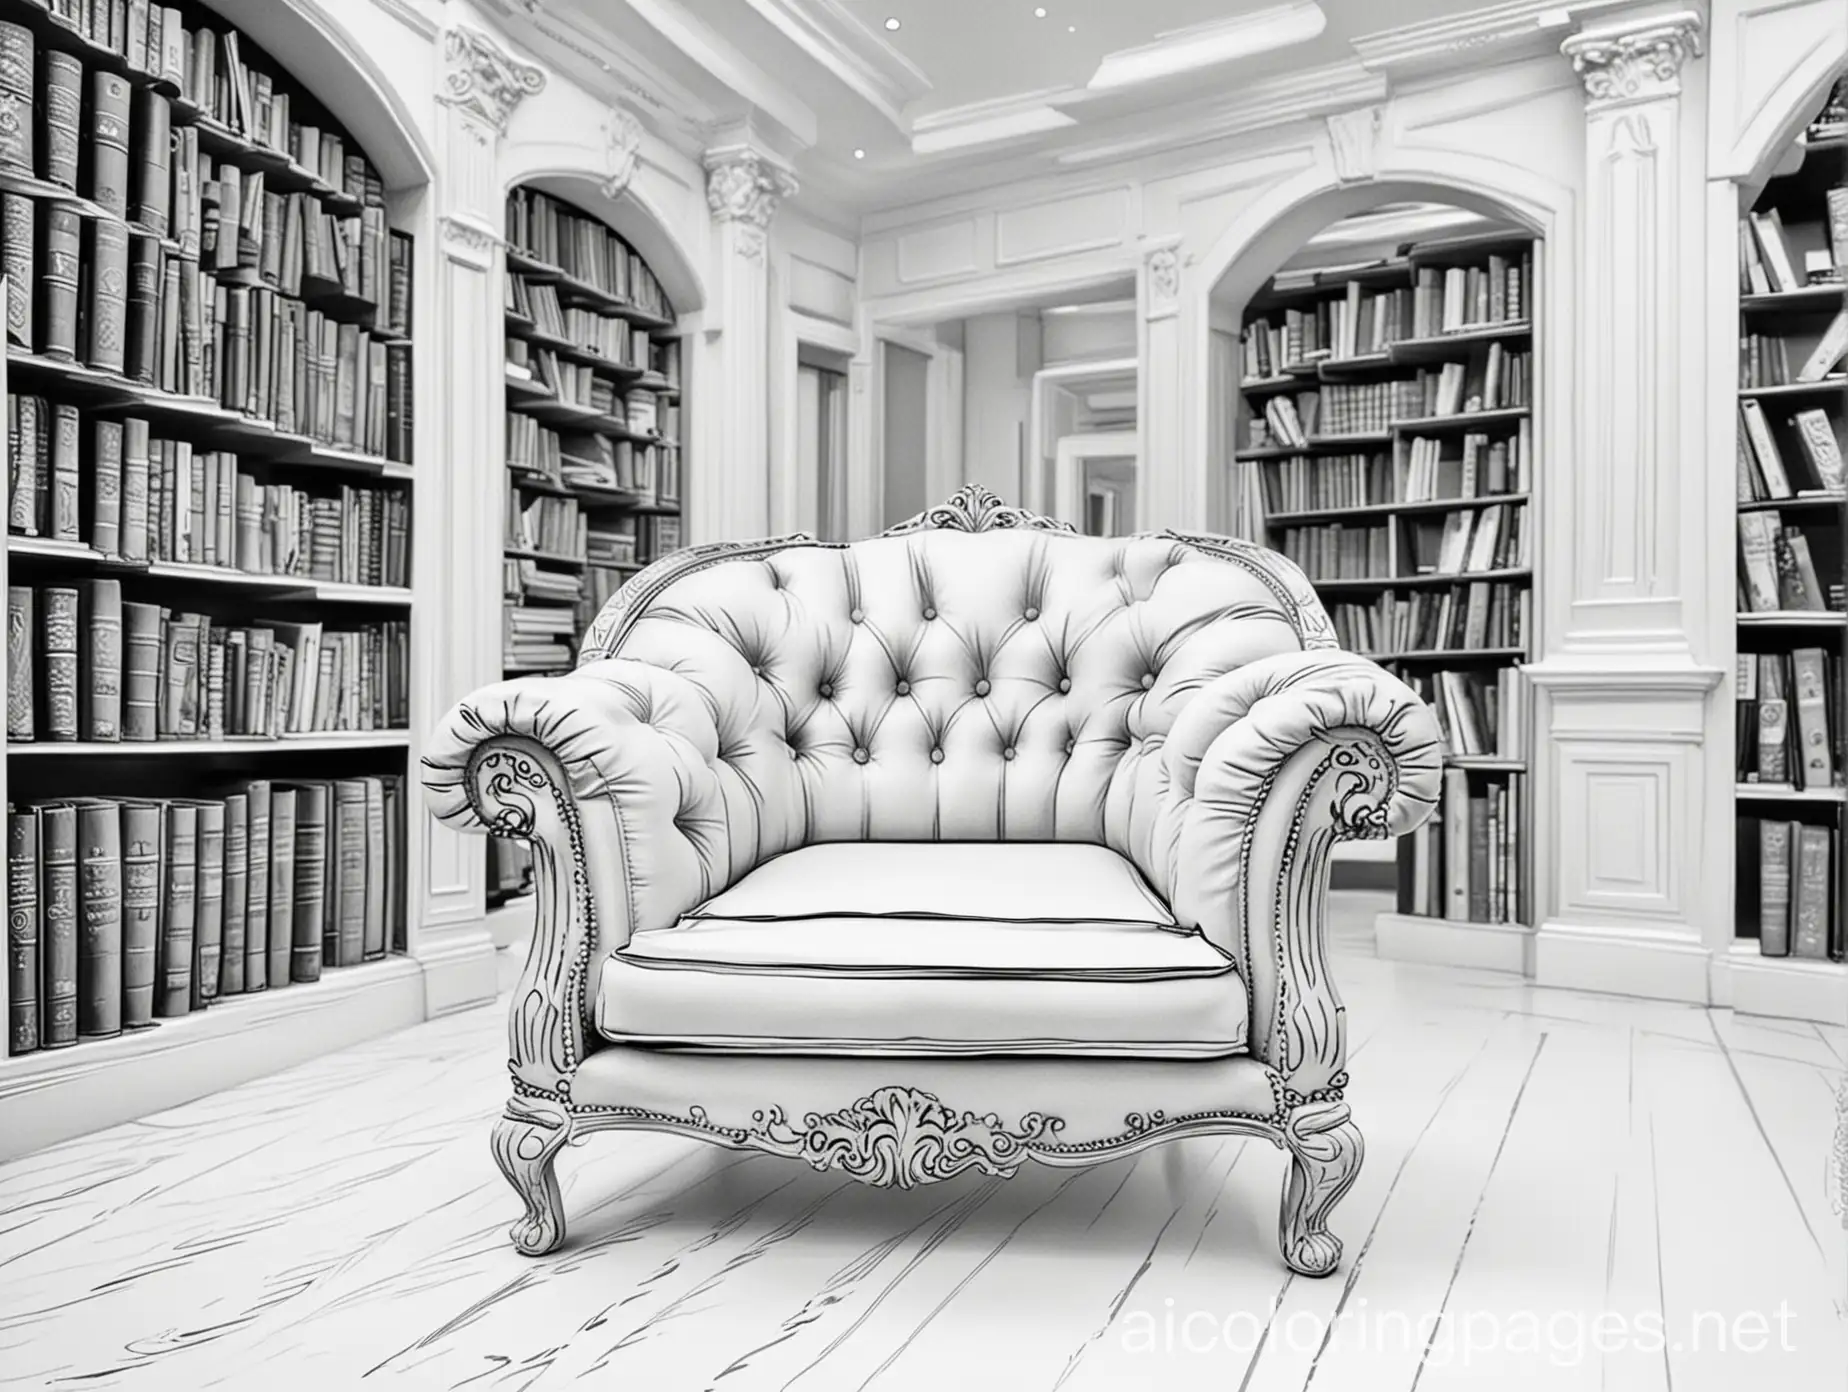 Fancy Library with a big chair, Coloring Page, black and white, line art, white background, Simplicity, Ample White Space. The background of the coloring page is plain white to make it easy for young children to color within the lines. The outlines of all the subjects are easy to distinguish, making it simple for kids to color without too much difficulty